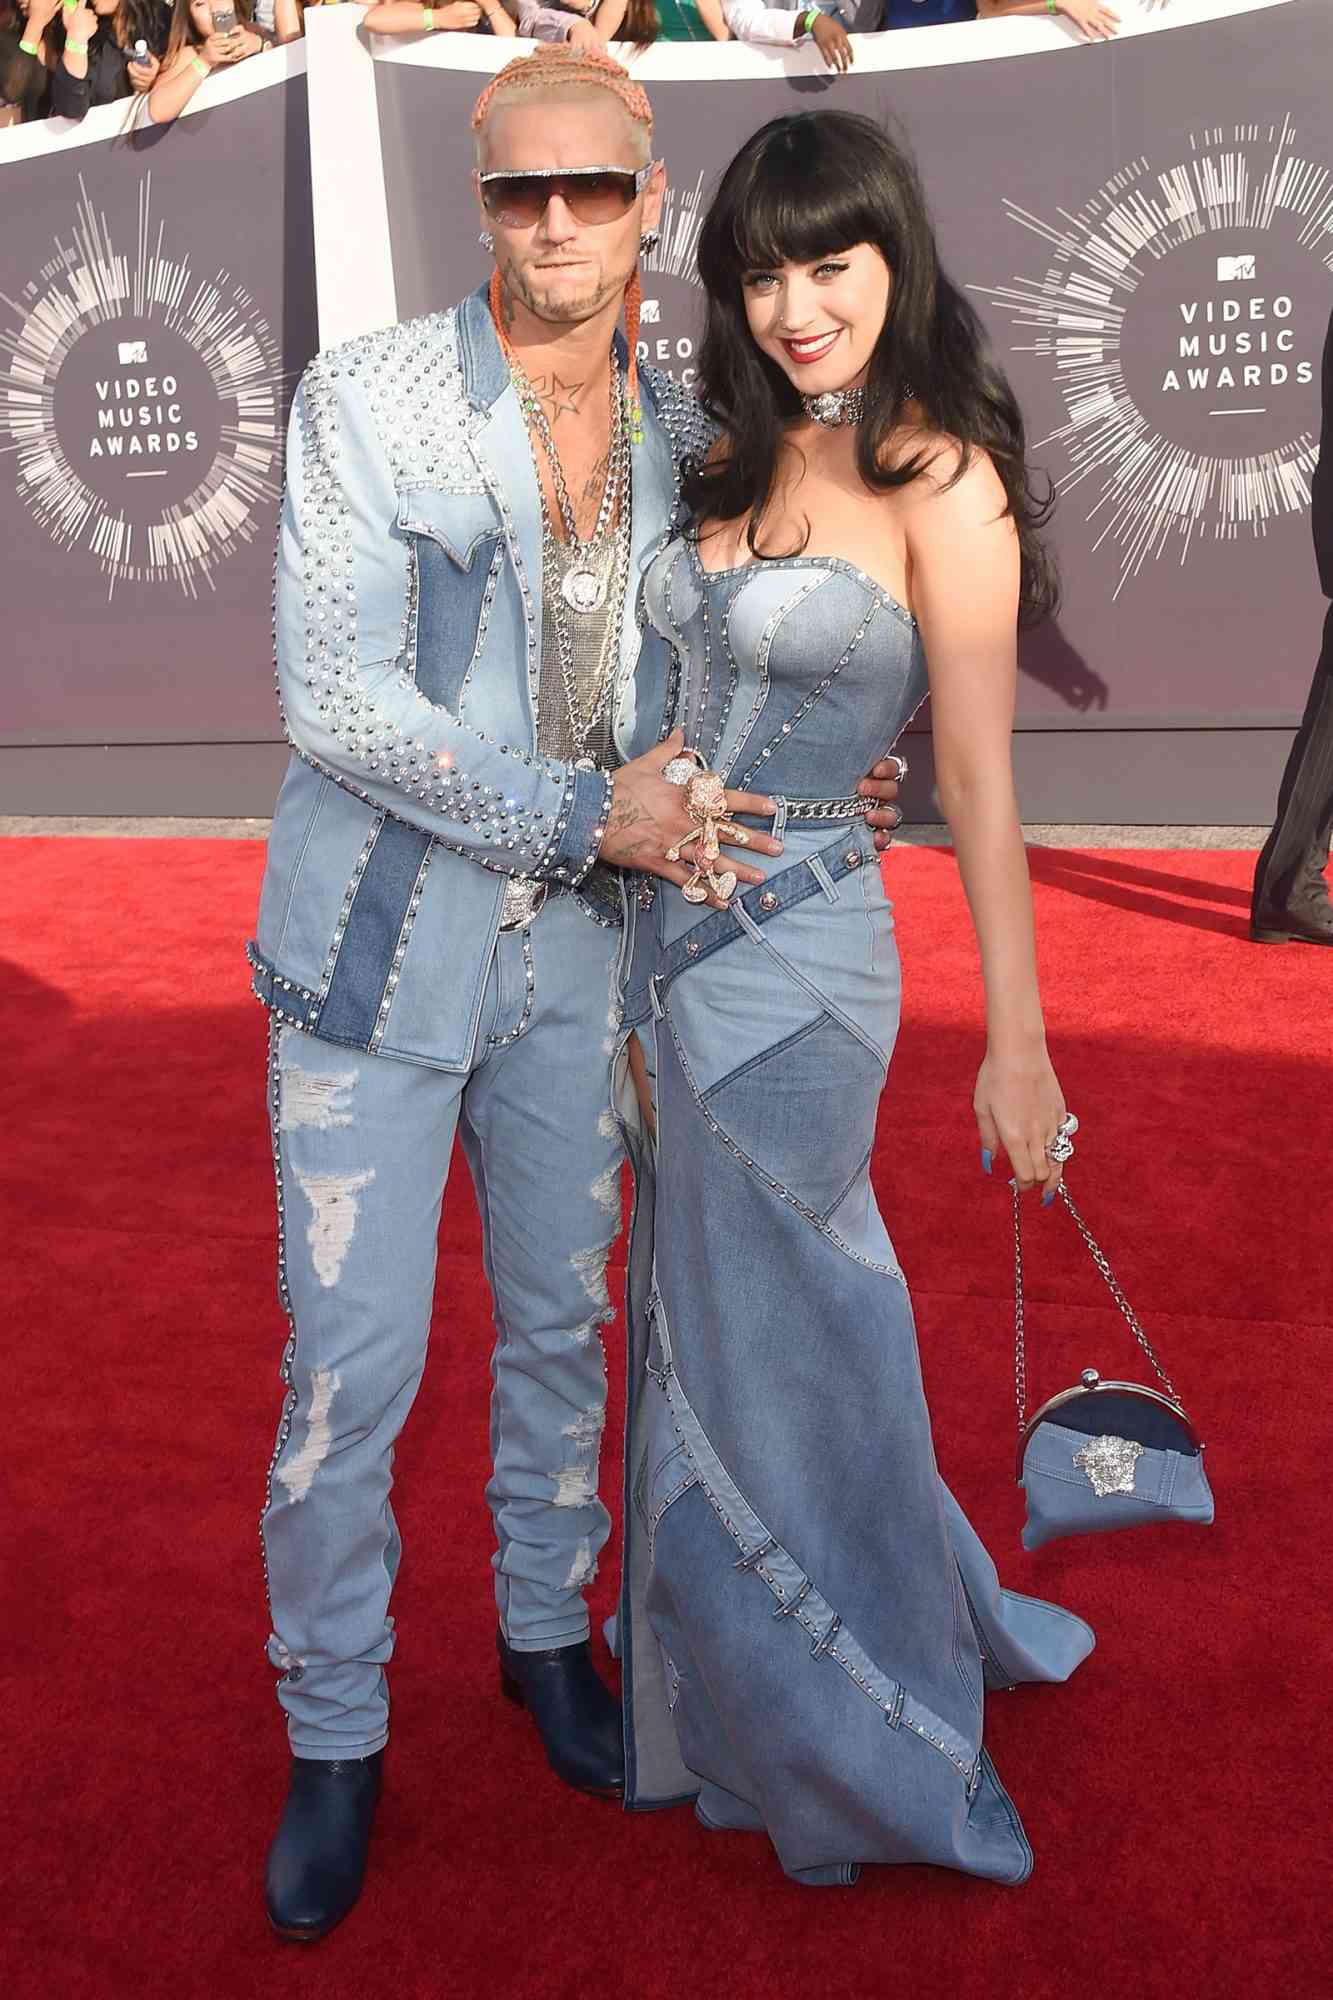 Katy Perry and Riff Raff